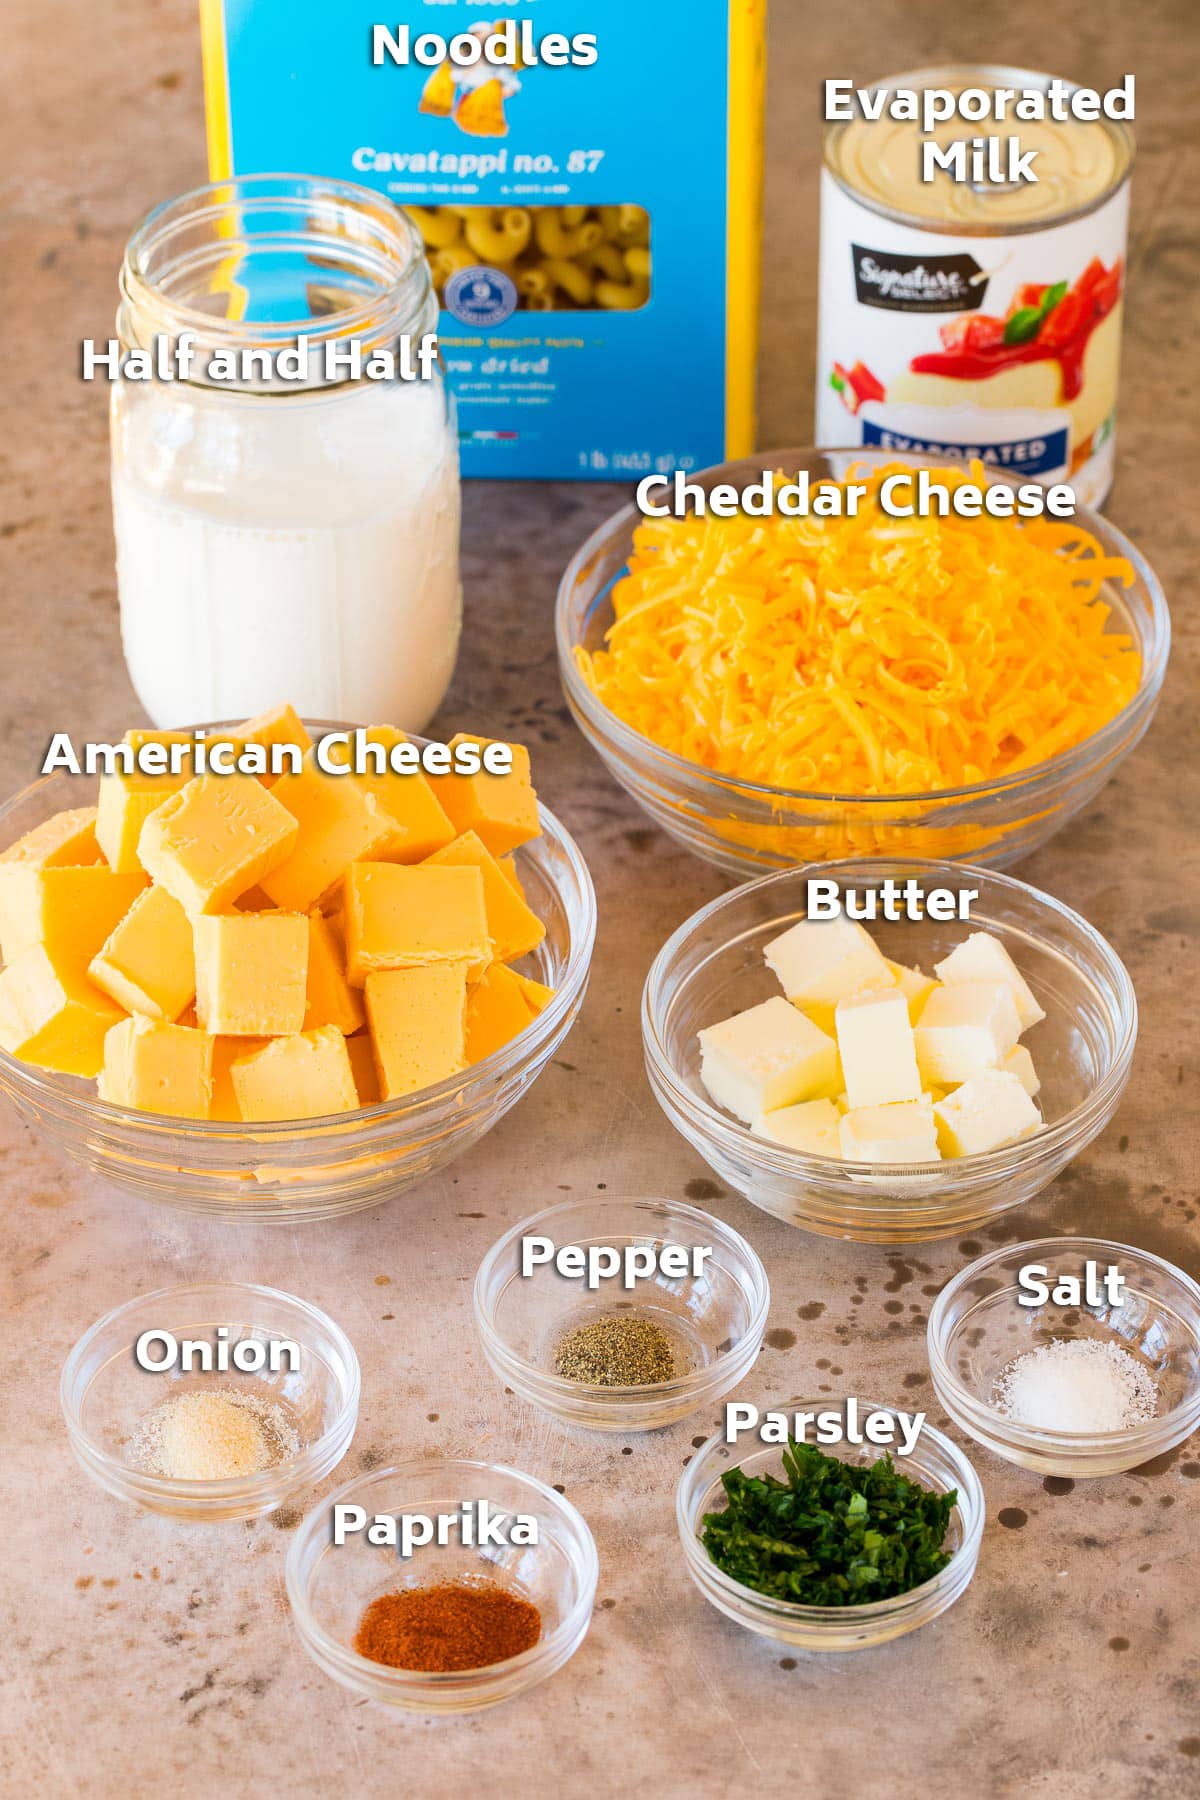 Ingredients including pasta, milk, cheeses, butter and seasonings.